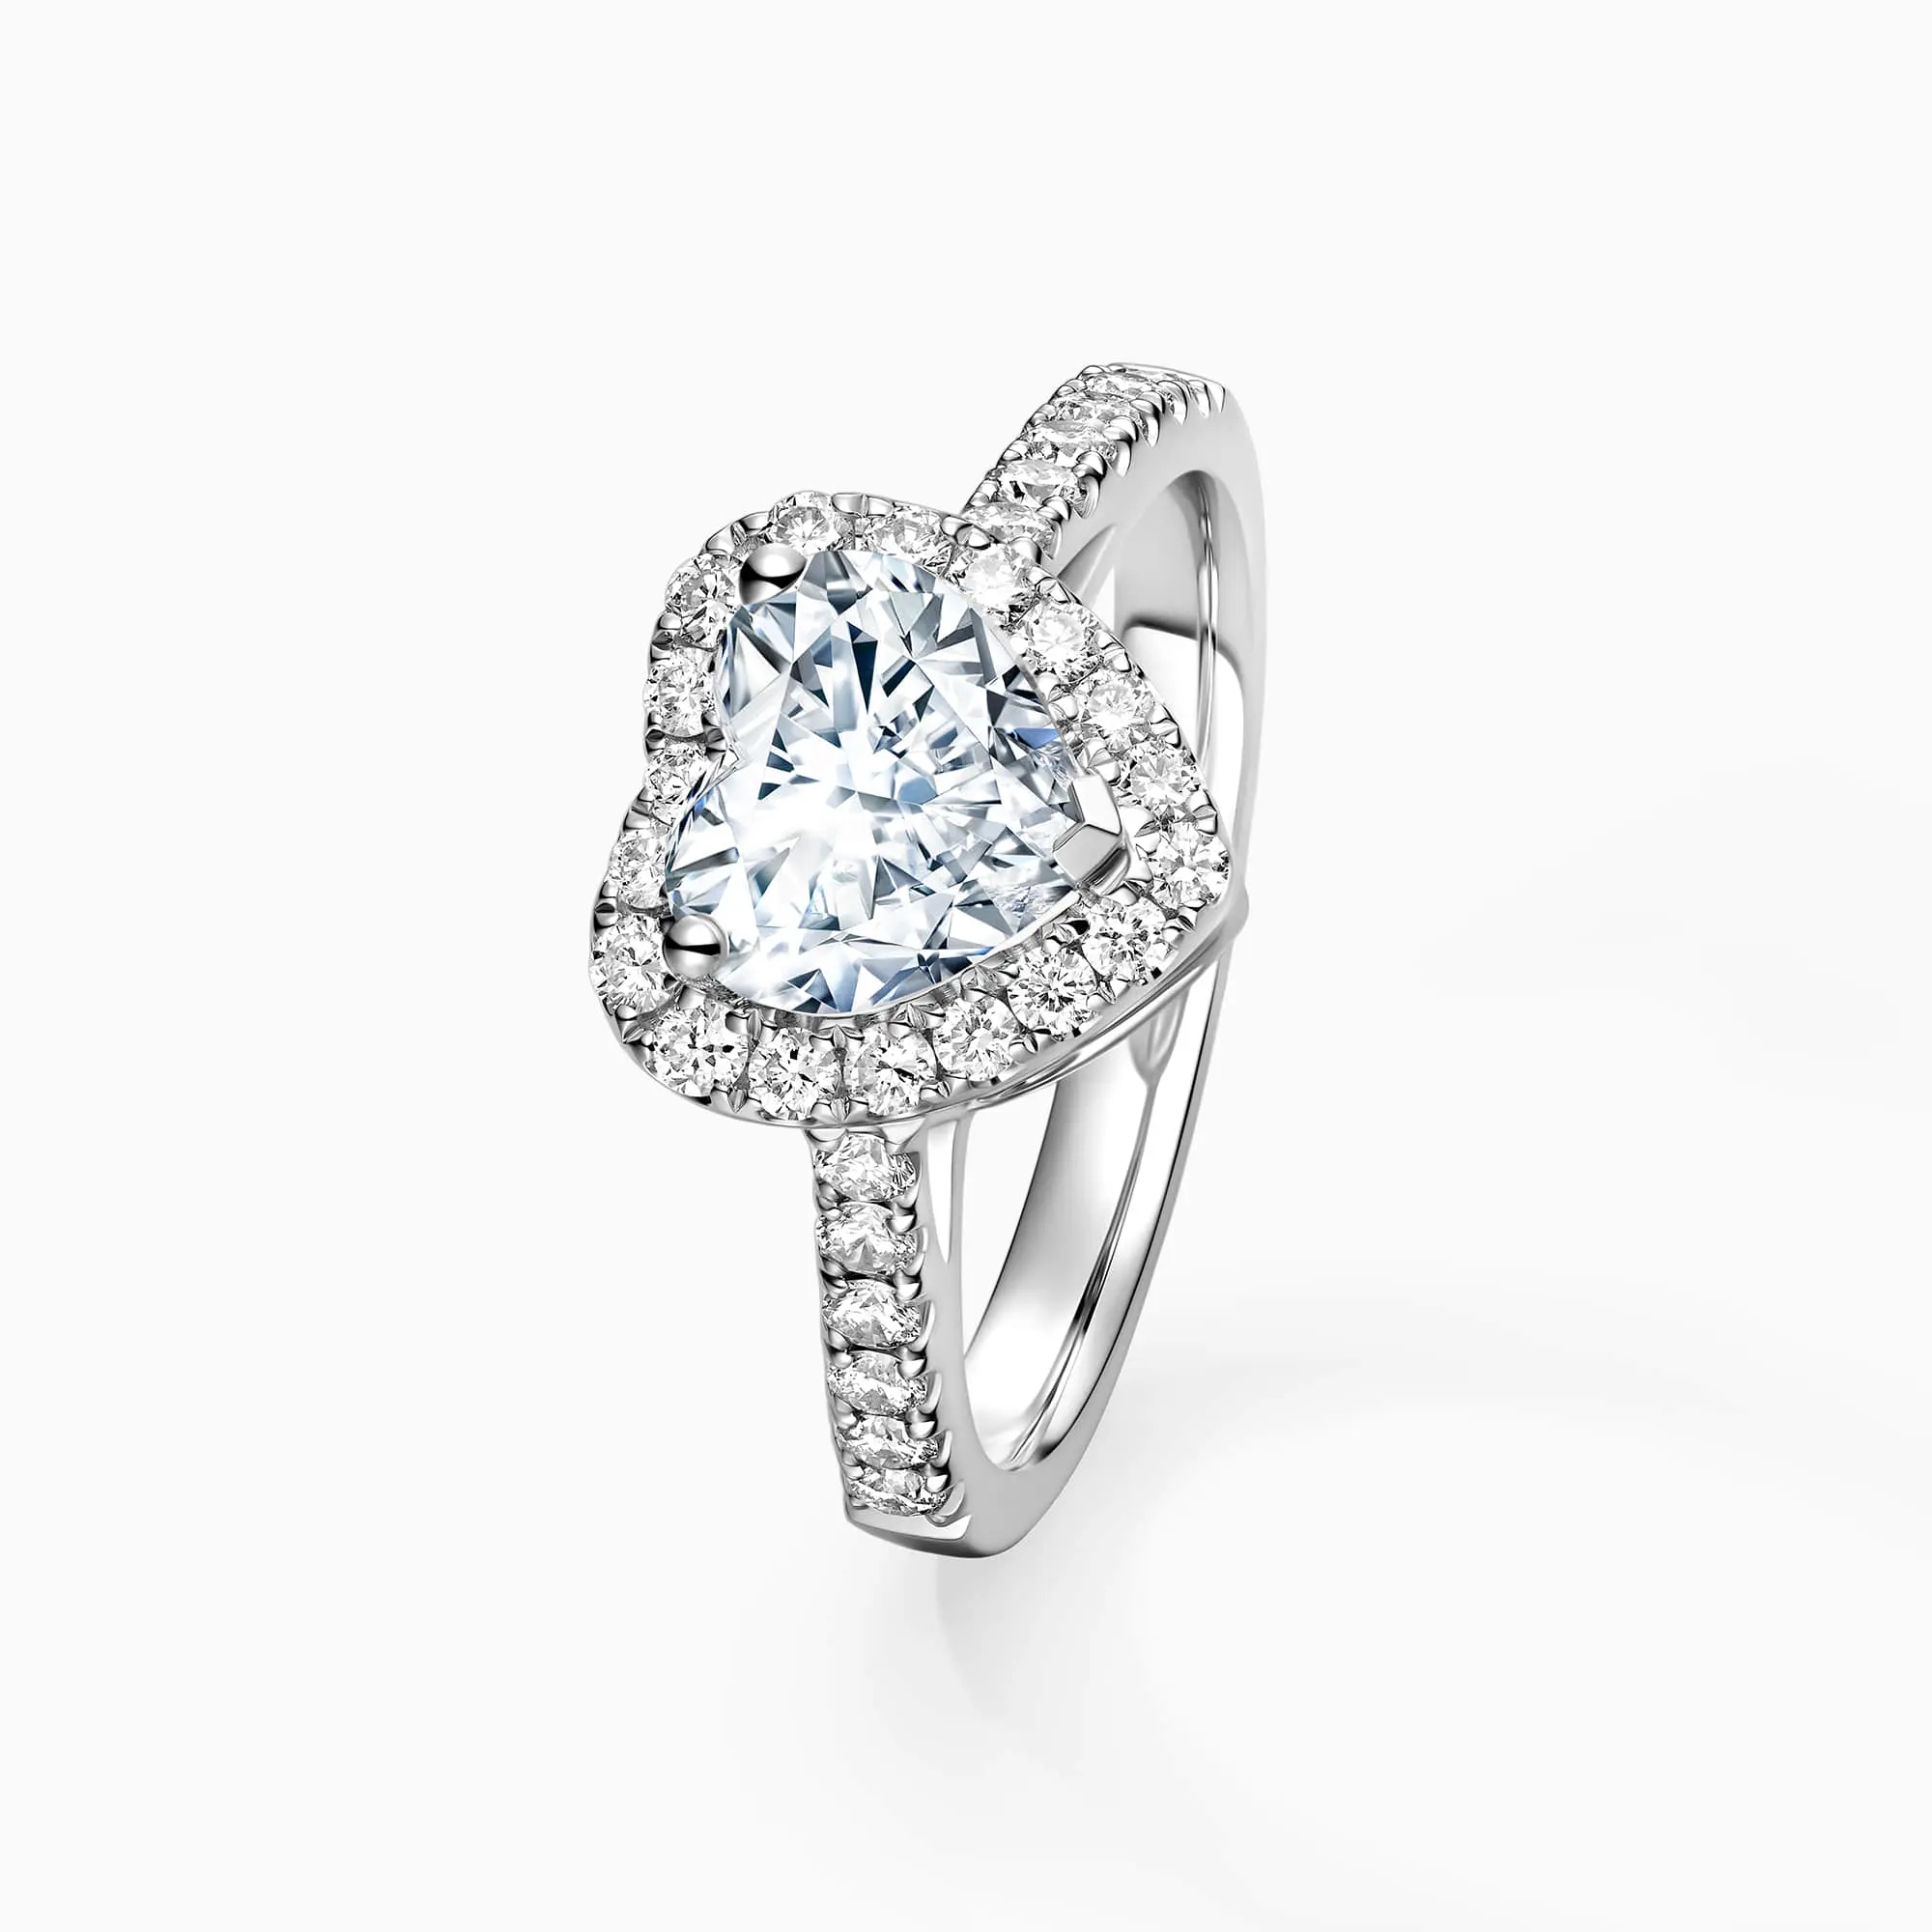 How to Buy a Diamond Ring Without Getting Duped